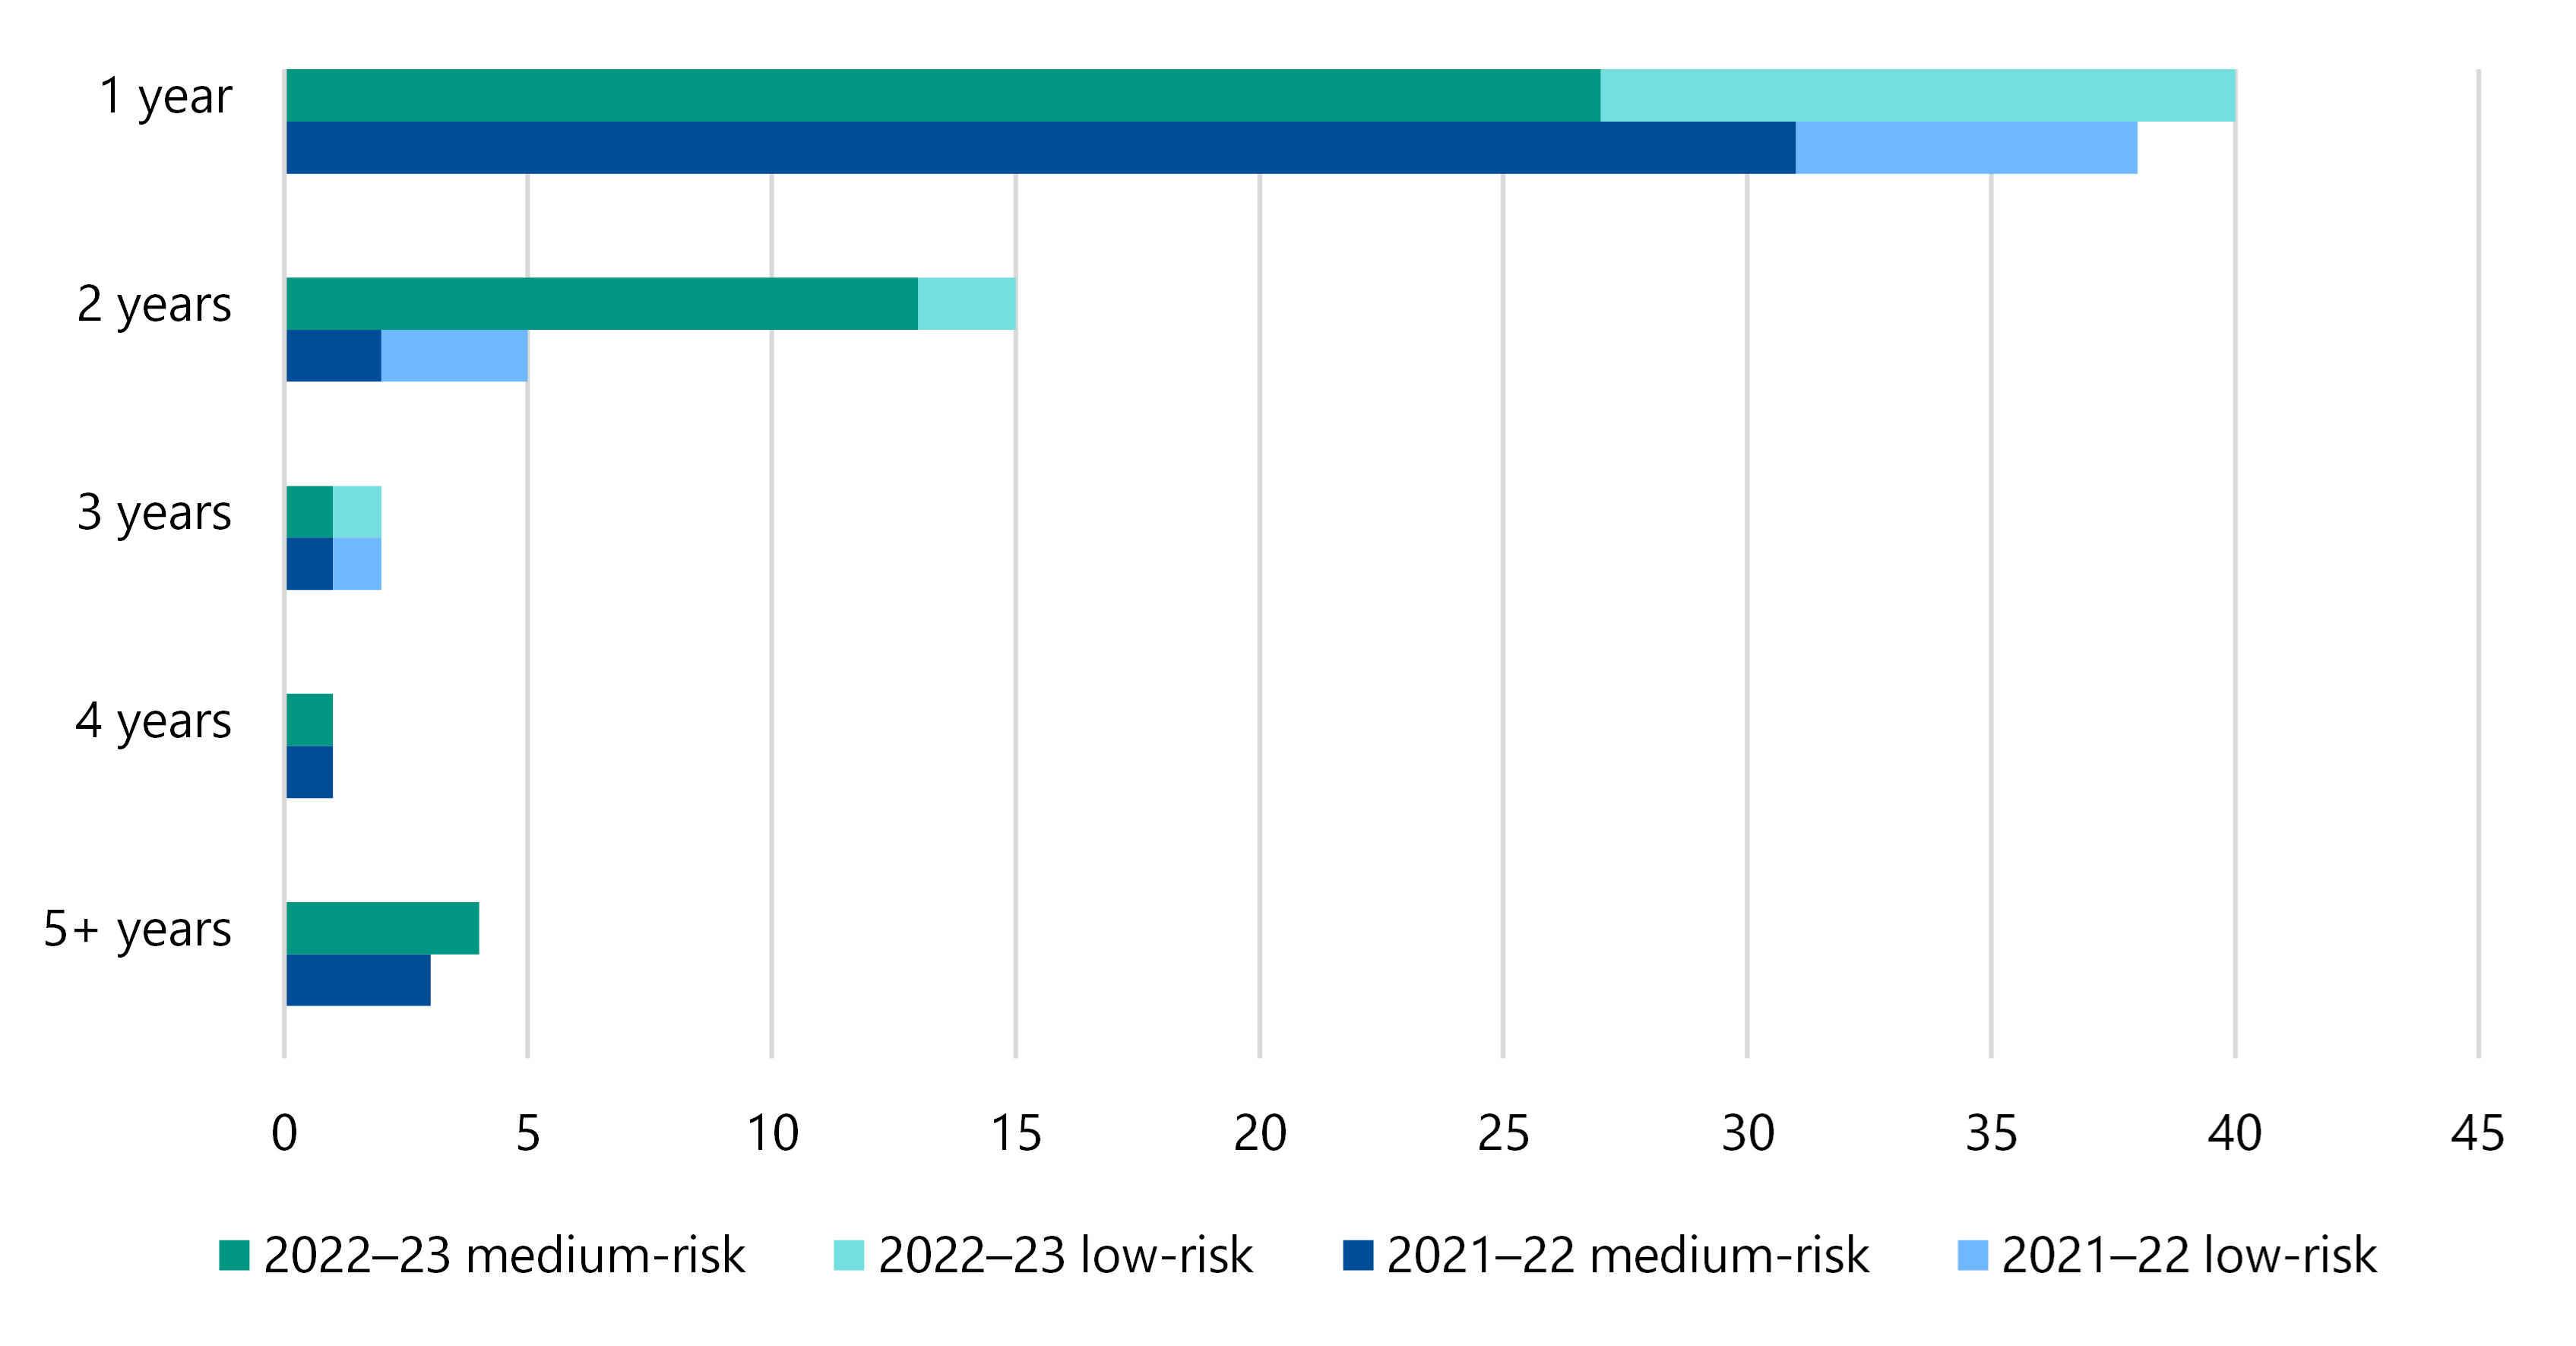  Figure 24 is a stacked combo bar chart showing that, across all councils in 2021–22, there were 7 low-risk IT issues that were from the prior year, 3 that were 2 years old, 1 that was 3 years old, and none older than that. In the same year, there were 31 medium-risk IT issues from the prior year, 2 that were 2 years old, 1 that was 3 years old, 1 that was 4 years old and 3 that were 5 years old. In 2022–23, there were 13 low-risk IT issues from the prior year, 2 that were 2 years old, 1 that was 3  years old and none that were older. In the same year, there were 27 medium-risk IT issues from the prior year, 13 that were 2 years old, 1 that was 3 years old, 1 that was 4 years old and 4 that were 5 years old.